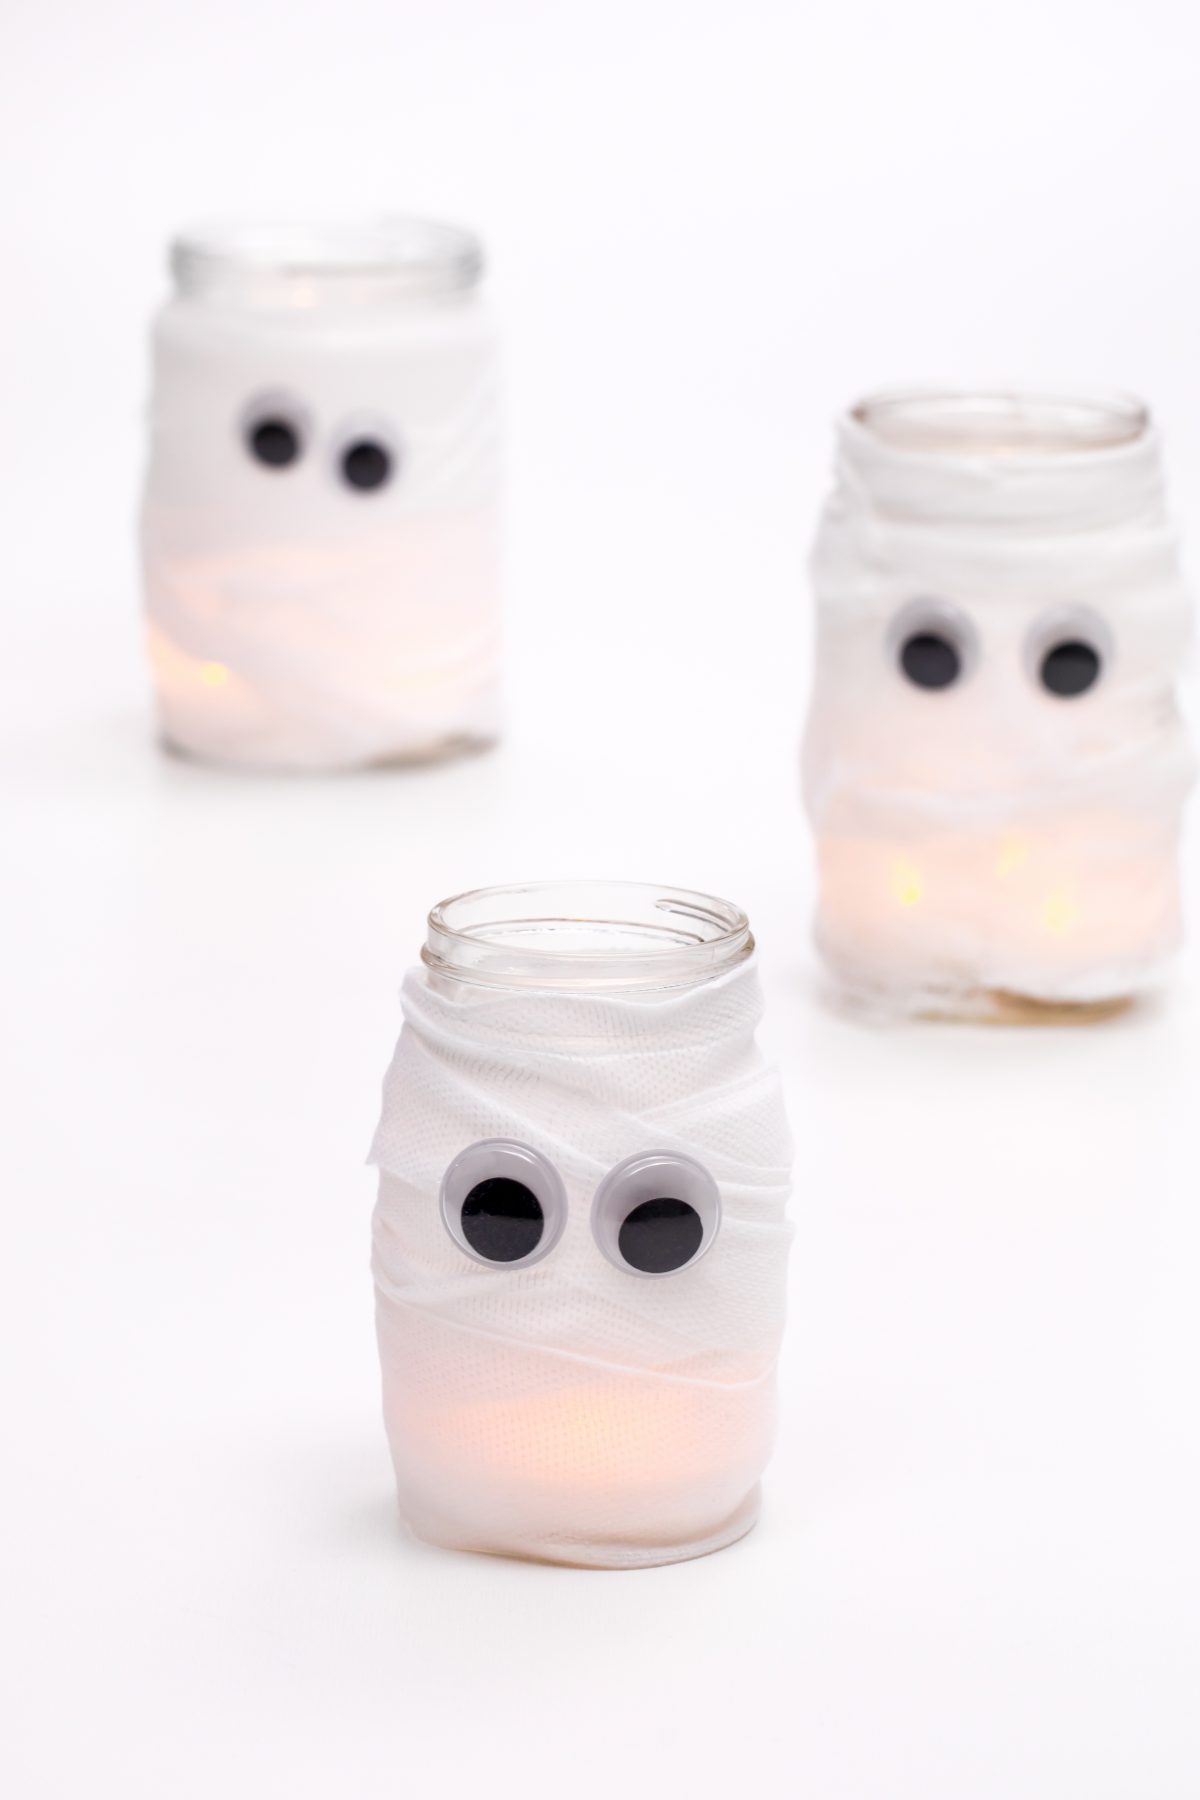 This cute Halloween craft couldnt be any easier!